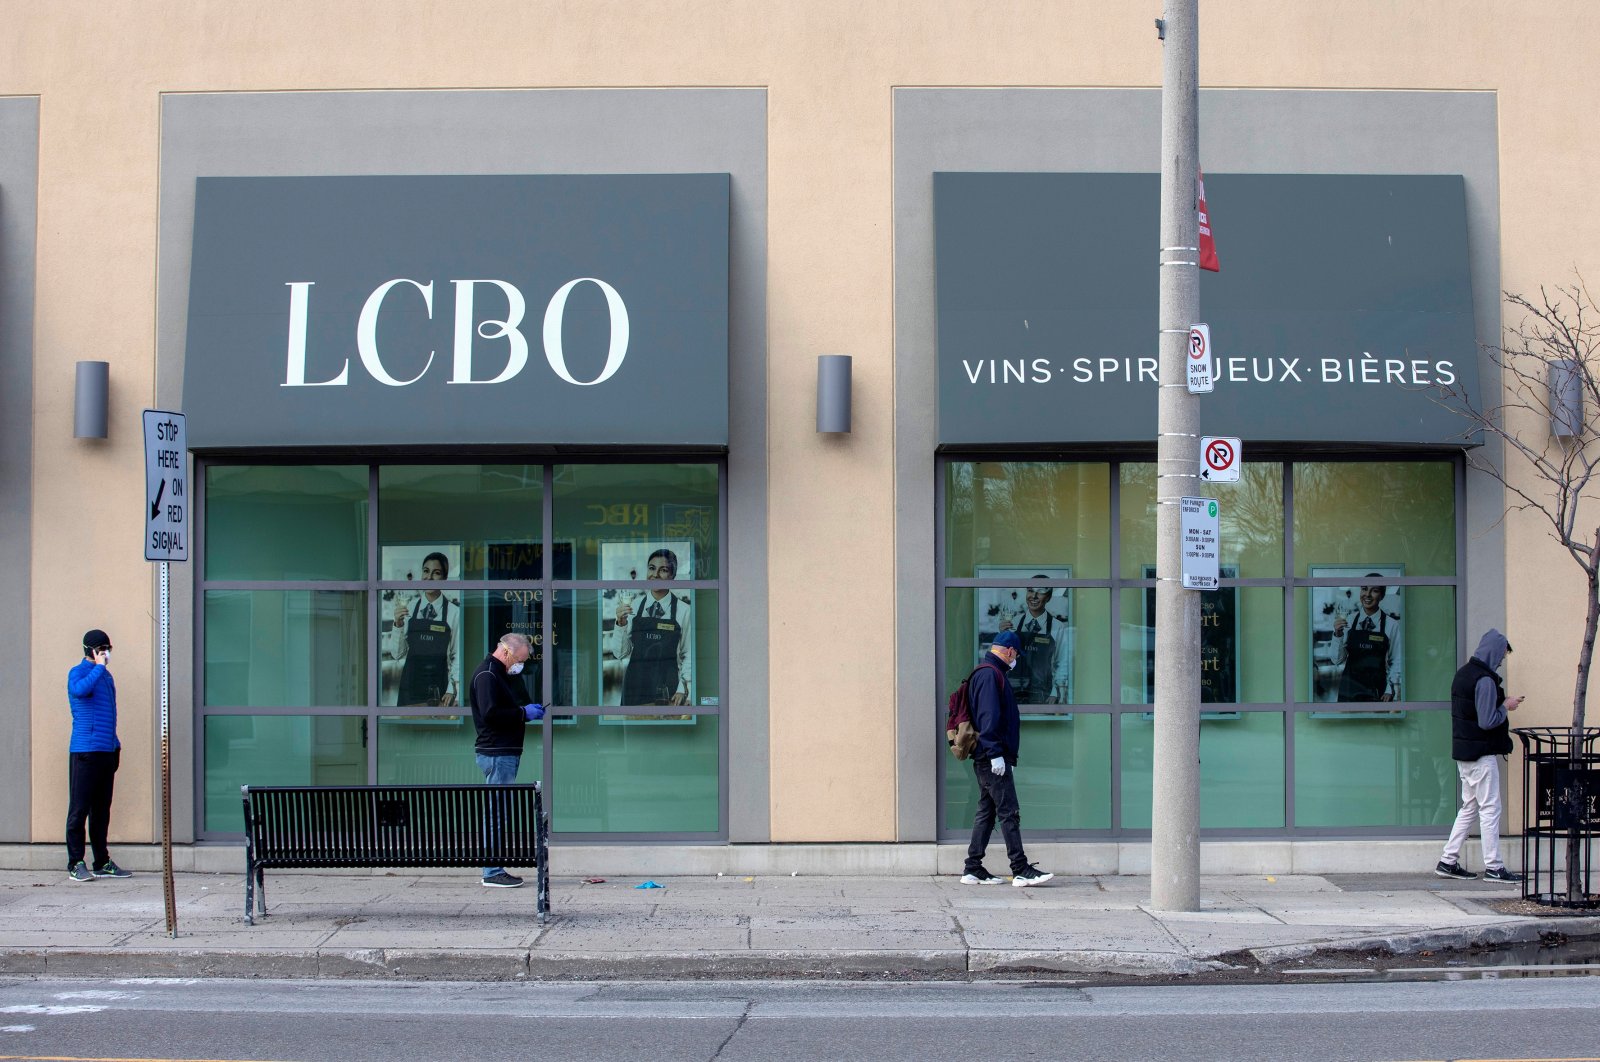 People wait outside of the LCBO (Liquor Control Board of Ontario) to purchase alcohol in Toronto, Ontario, Canada April 9, 2020. (Reuters File Photo)